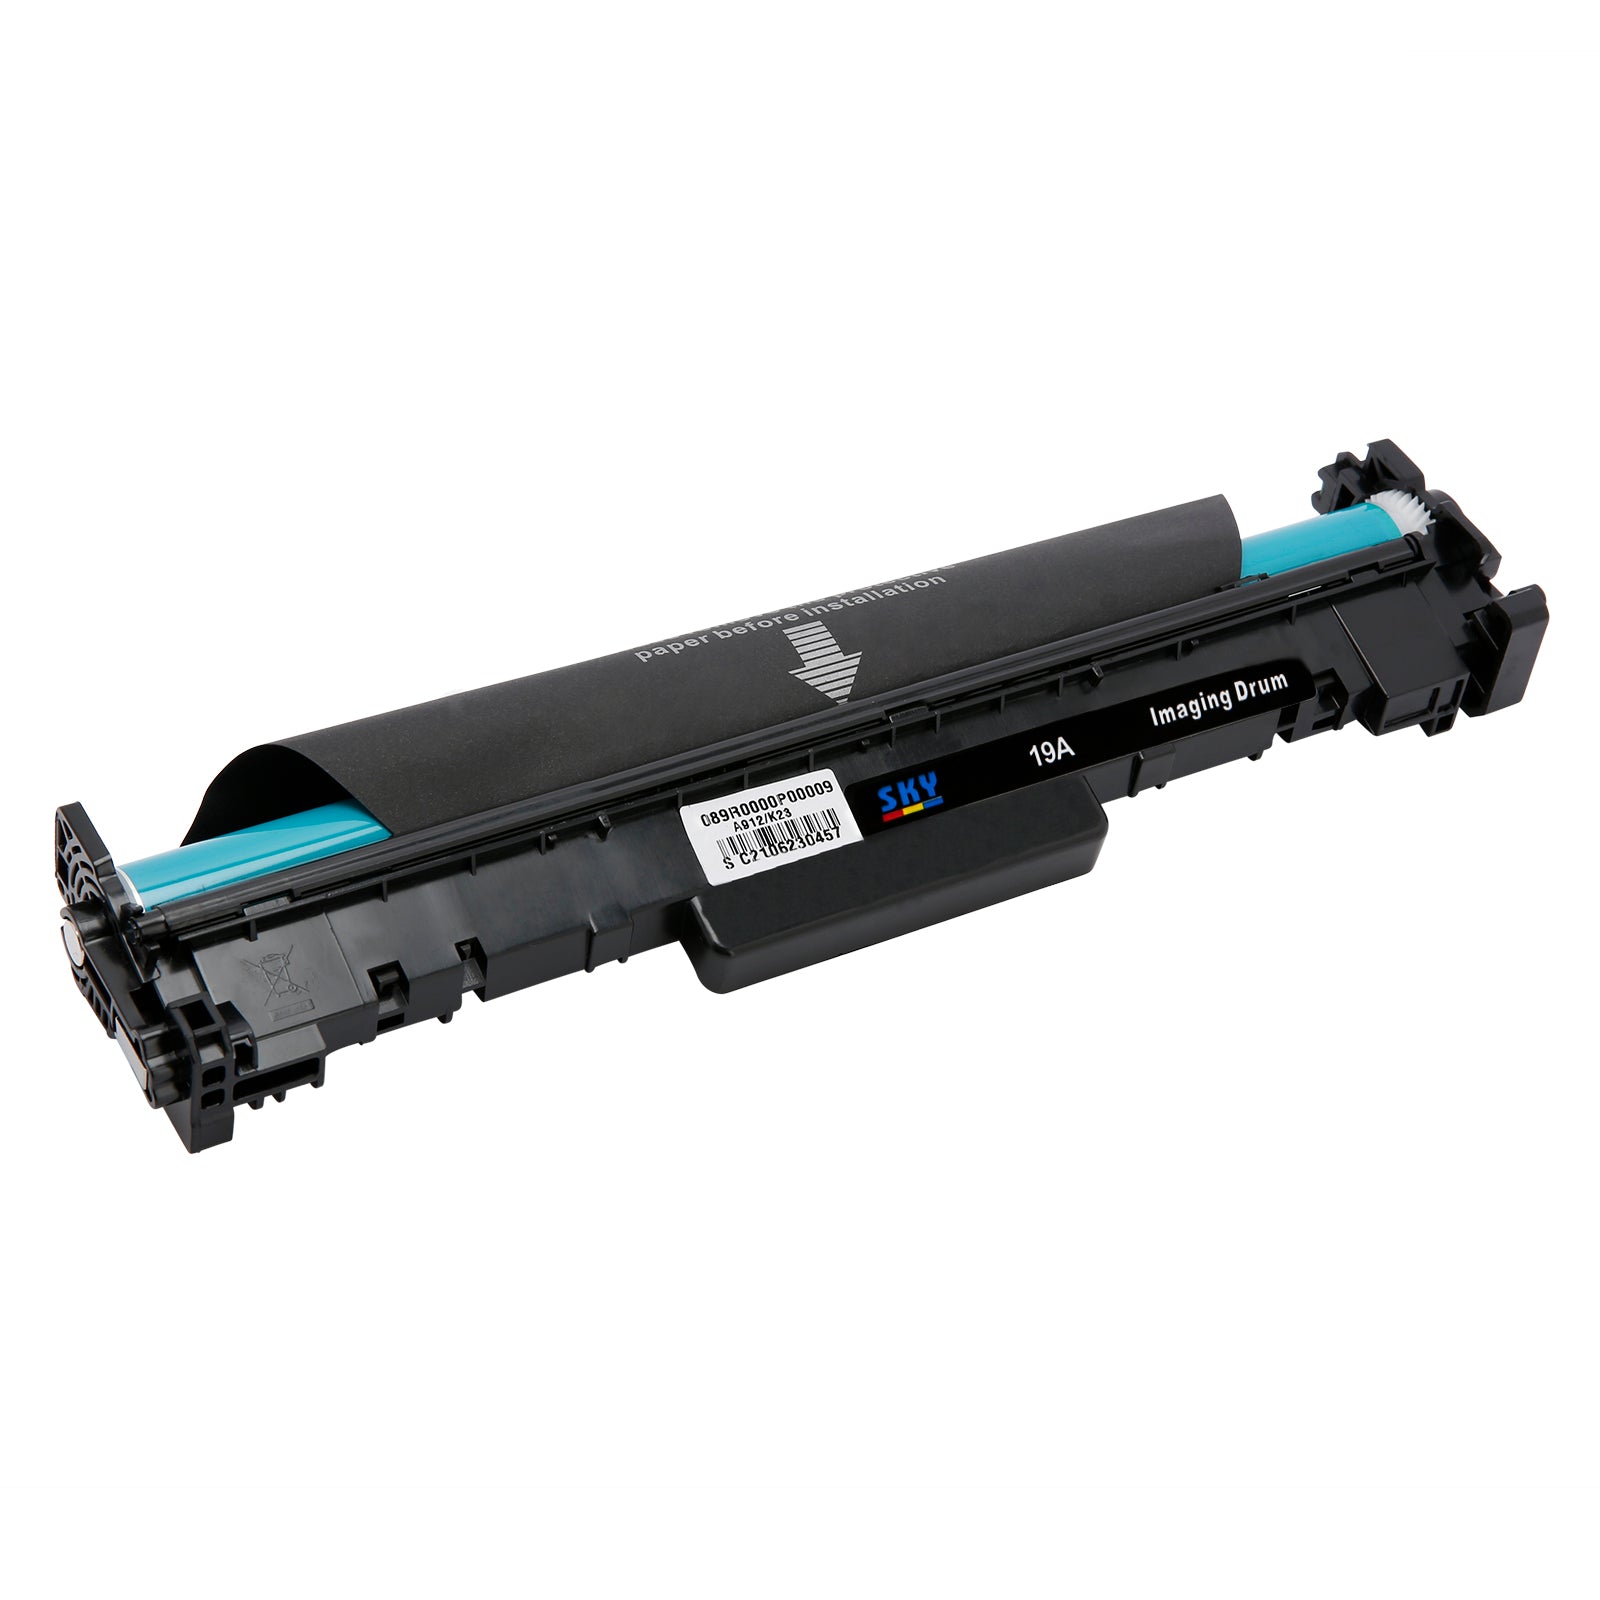 SKY 19A  Drum Unit  CF219A for HP Laserjet M102 and MFP M130 Printers